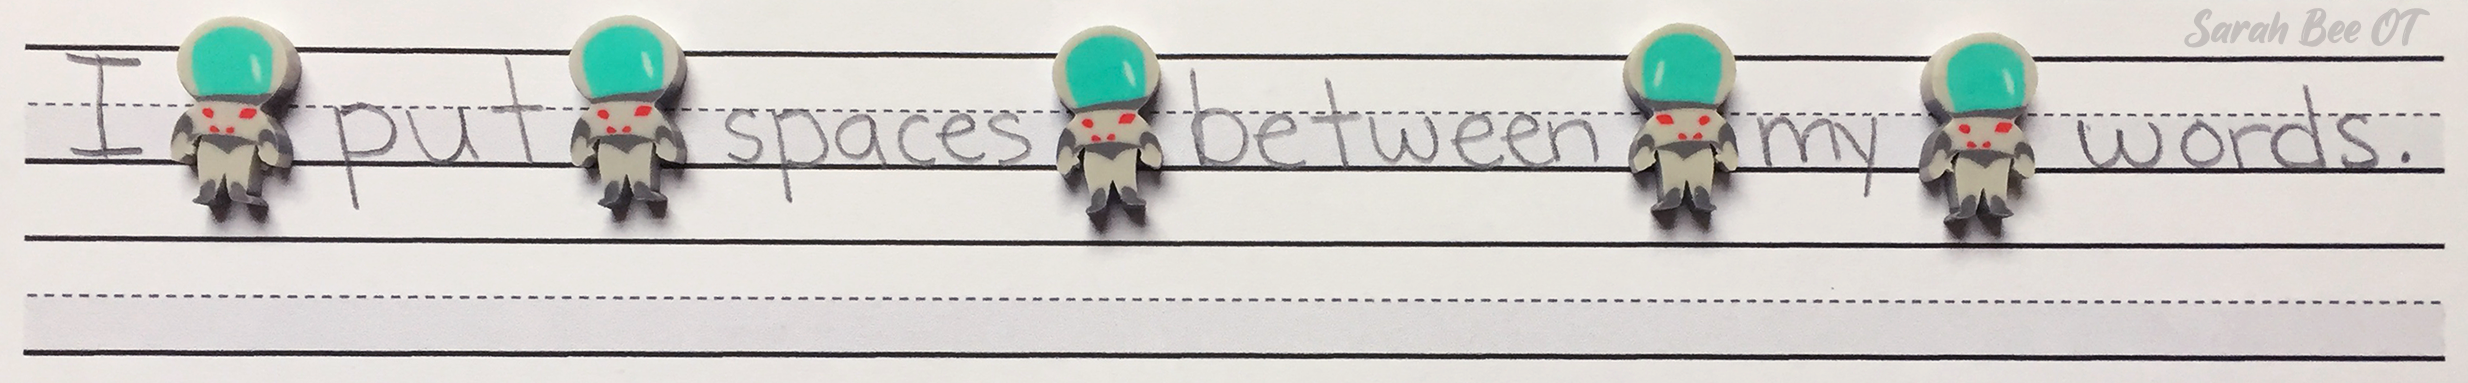 word spacing with mini erasers